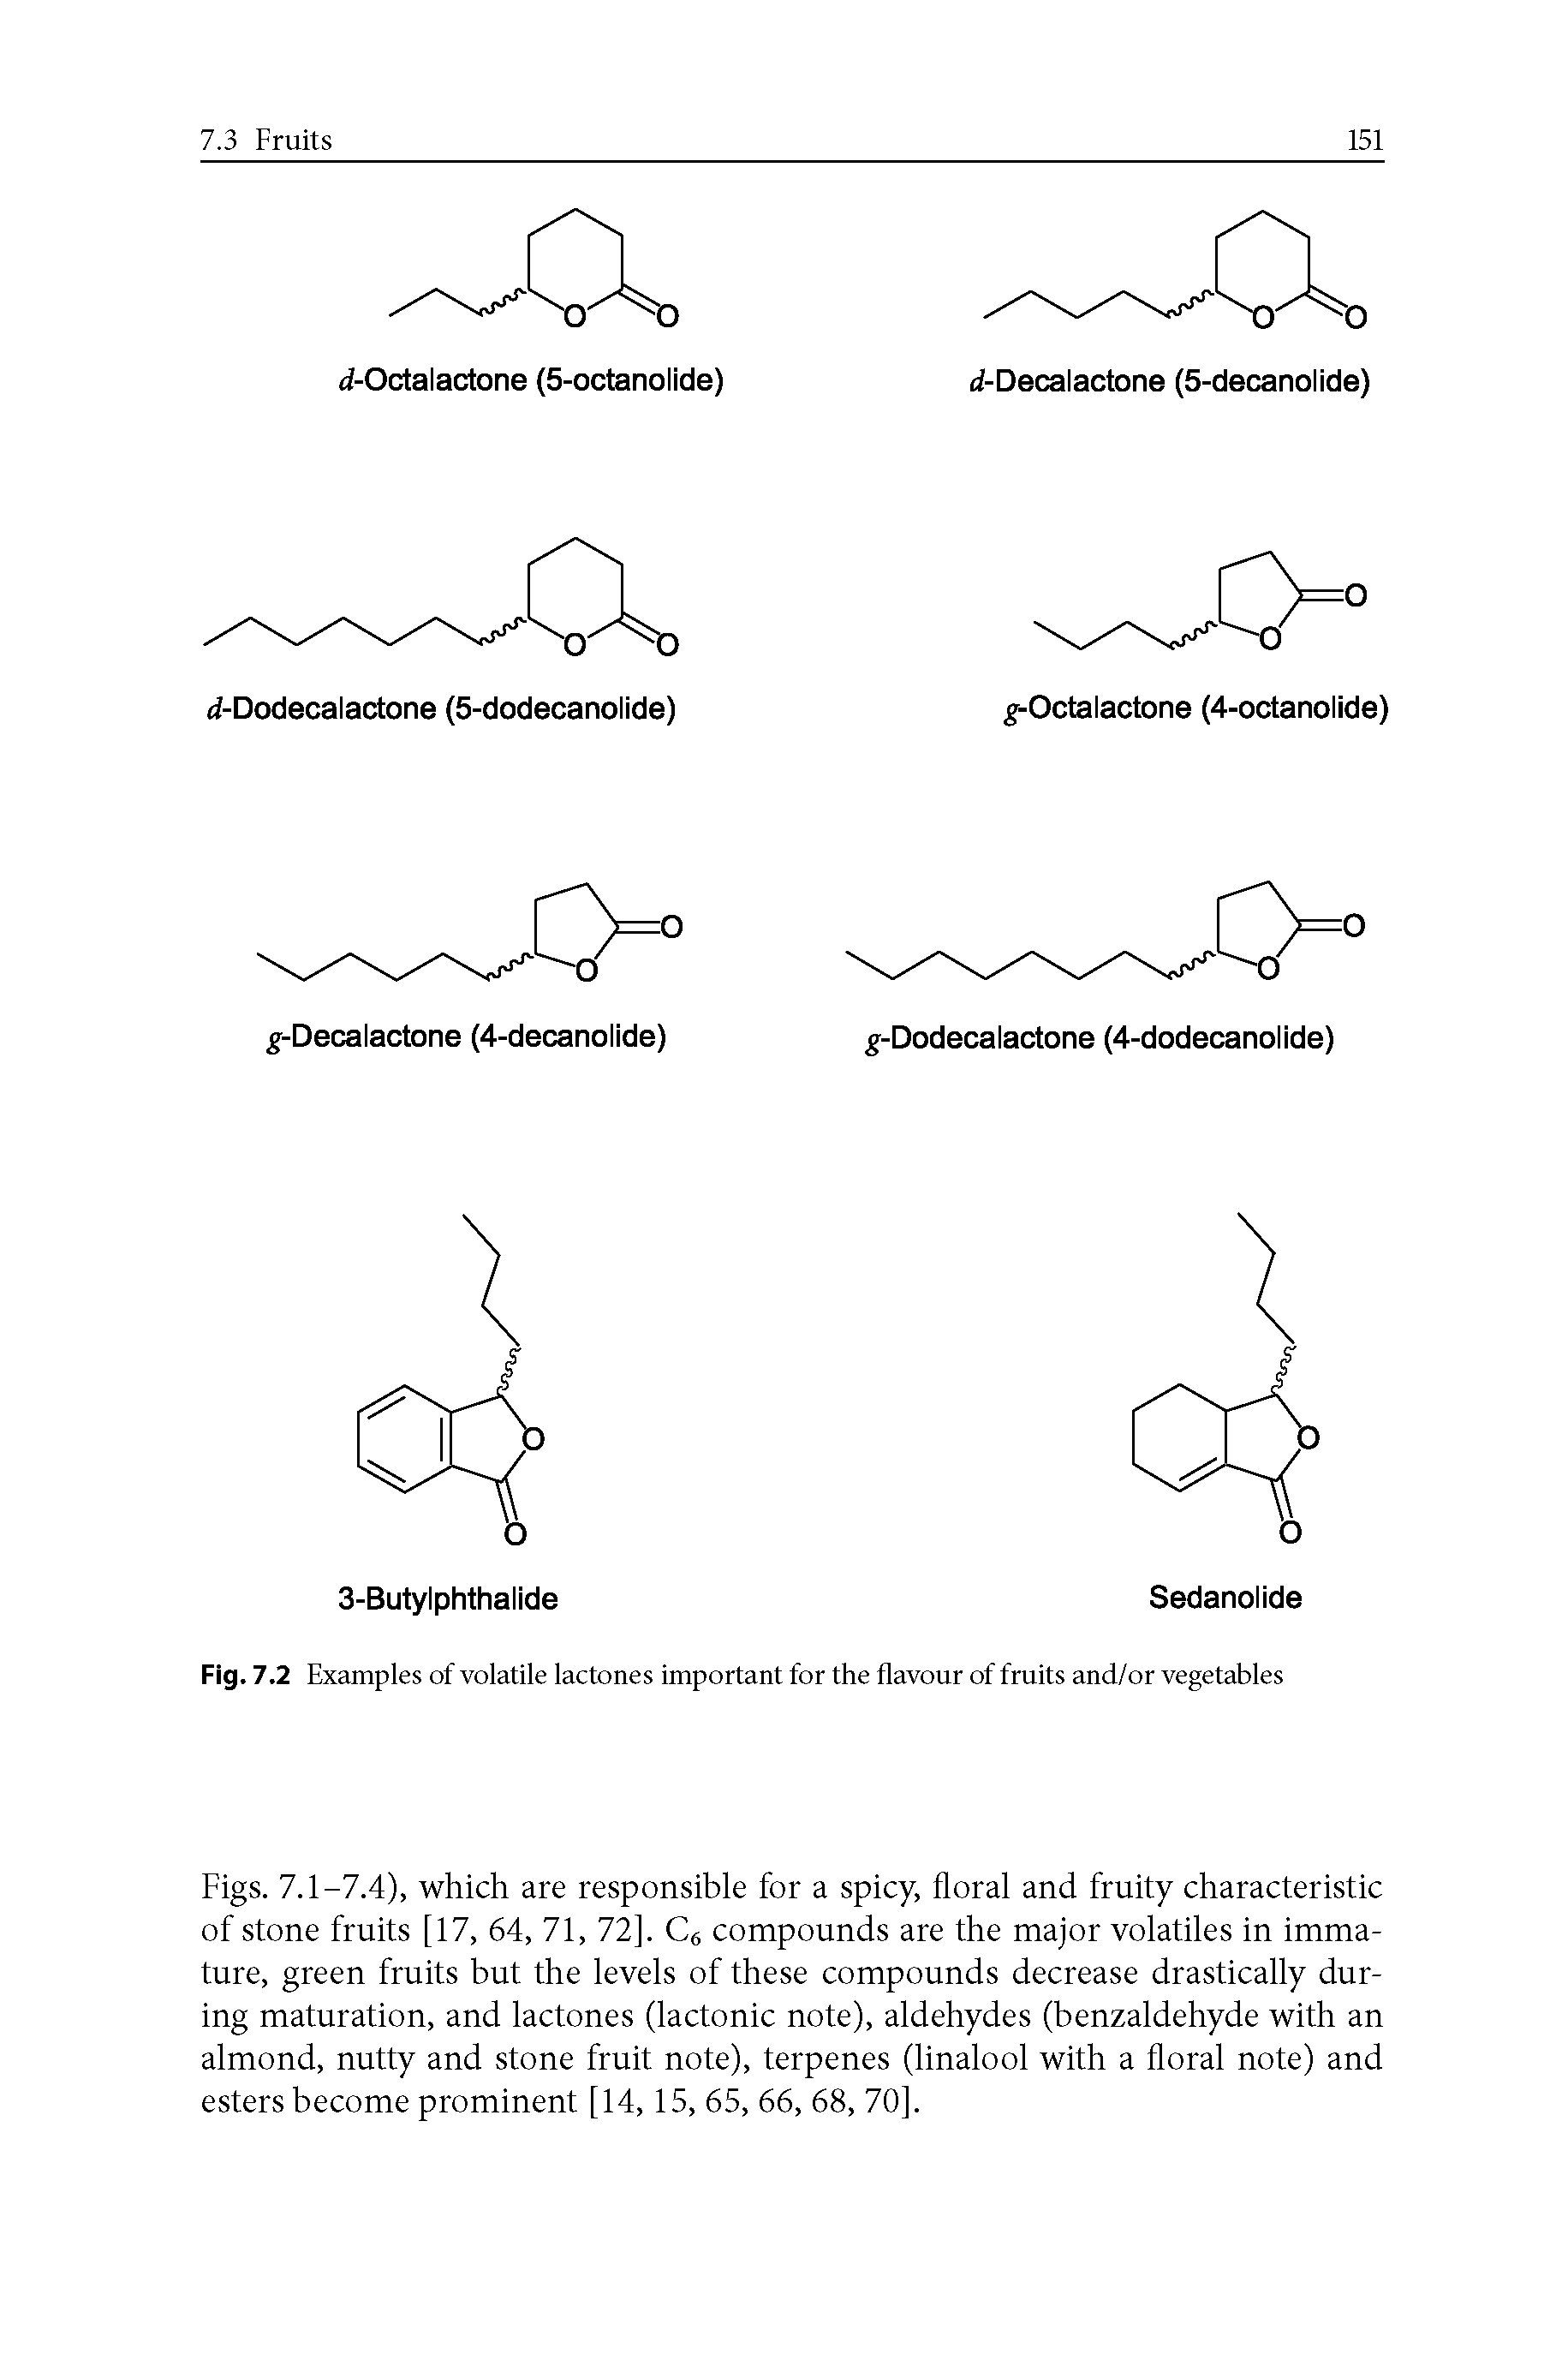 Fig. 7.2 Examples of volatile lactones important for the flavour of fruits and/or vegetables...